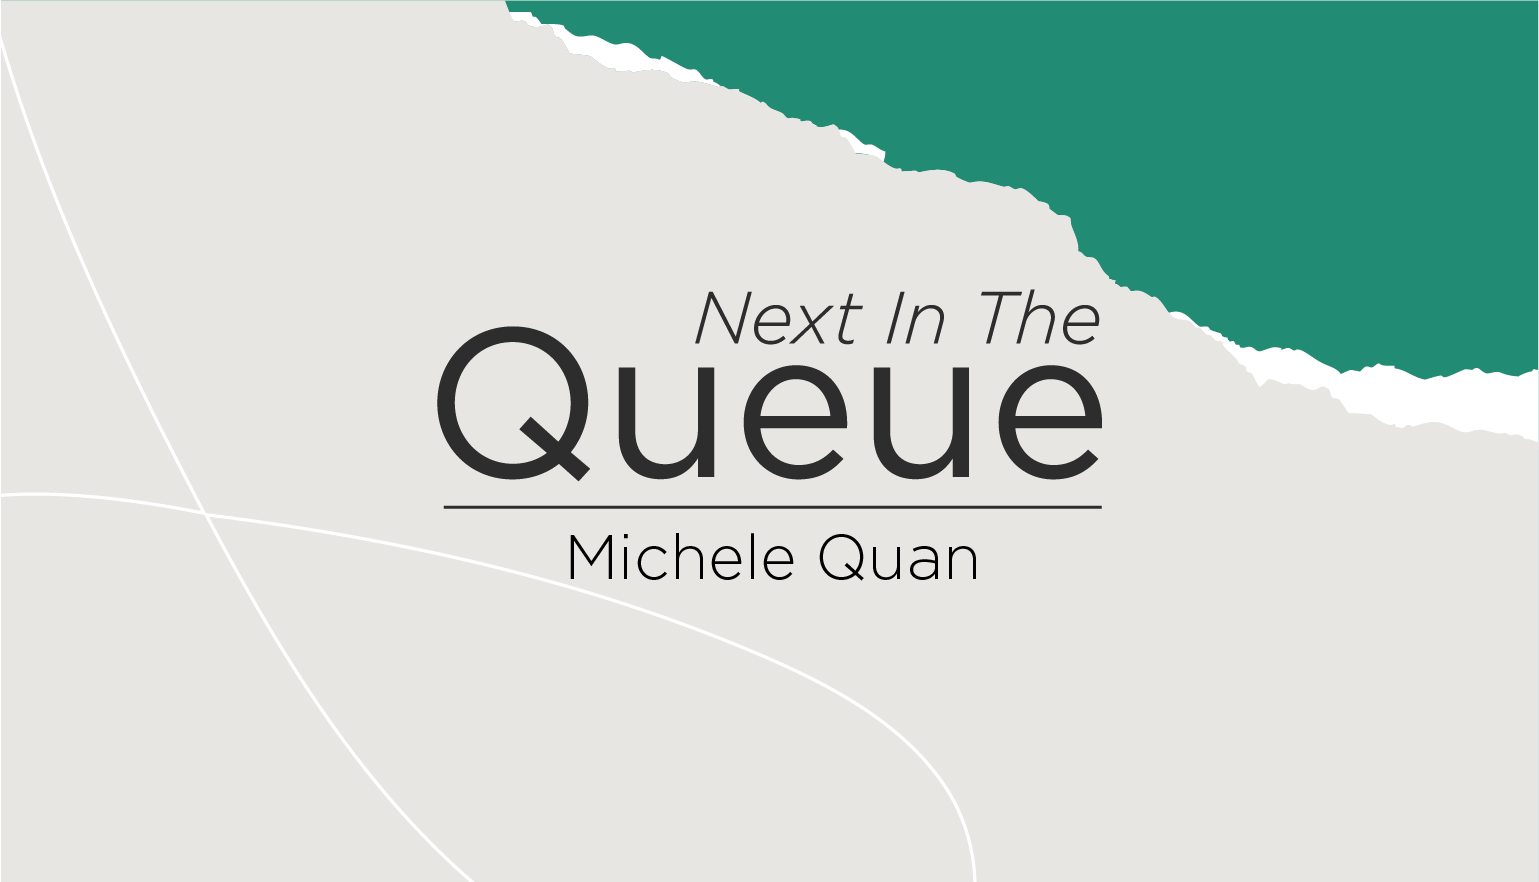 blog post cover graphic for The Queue featuring Michele Quan